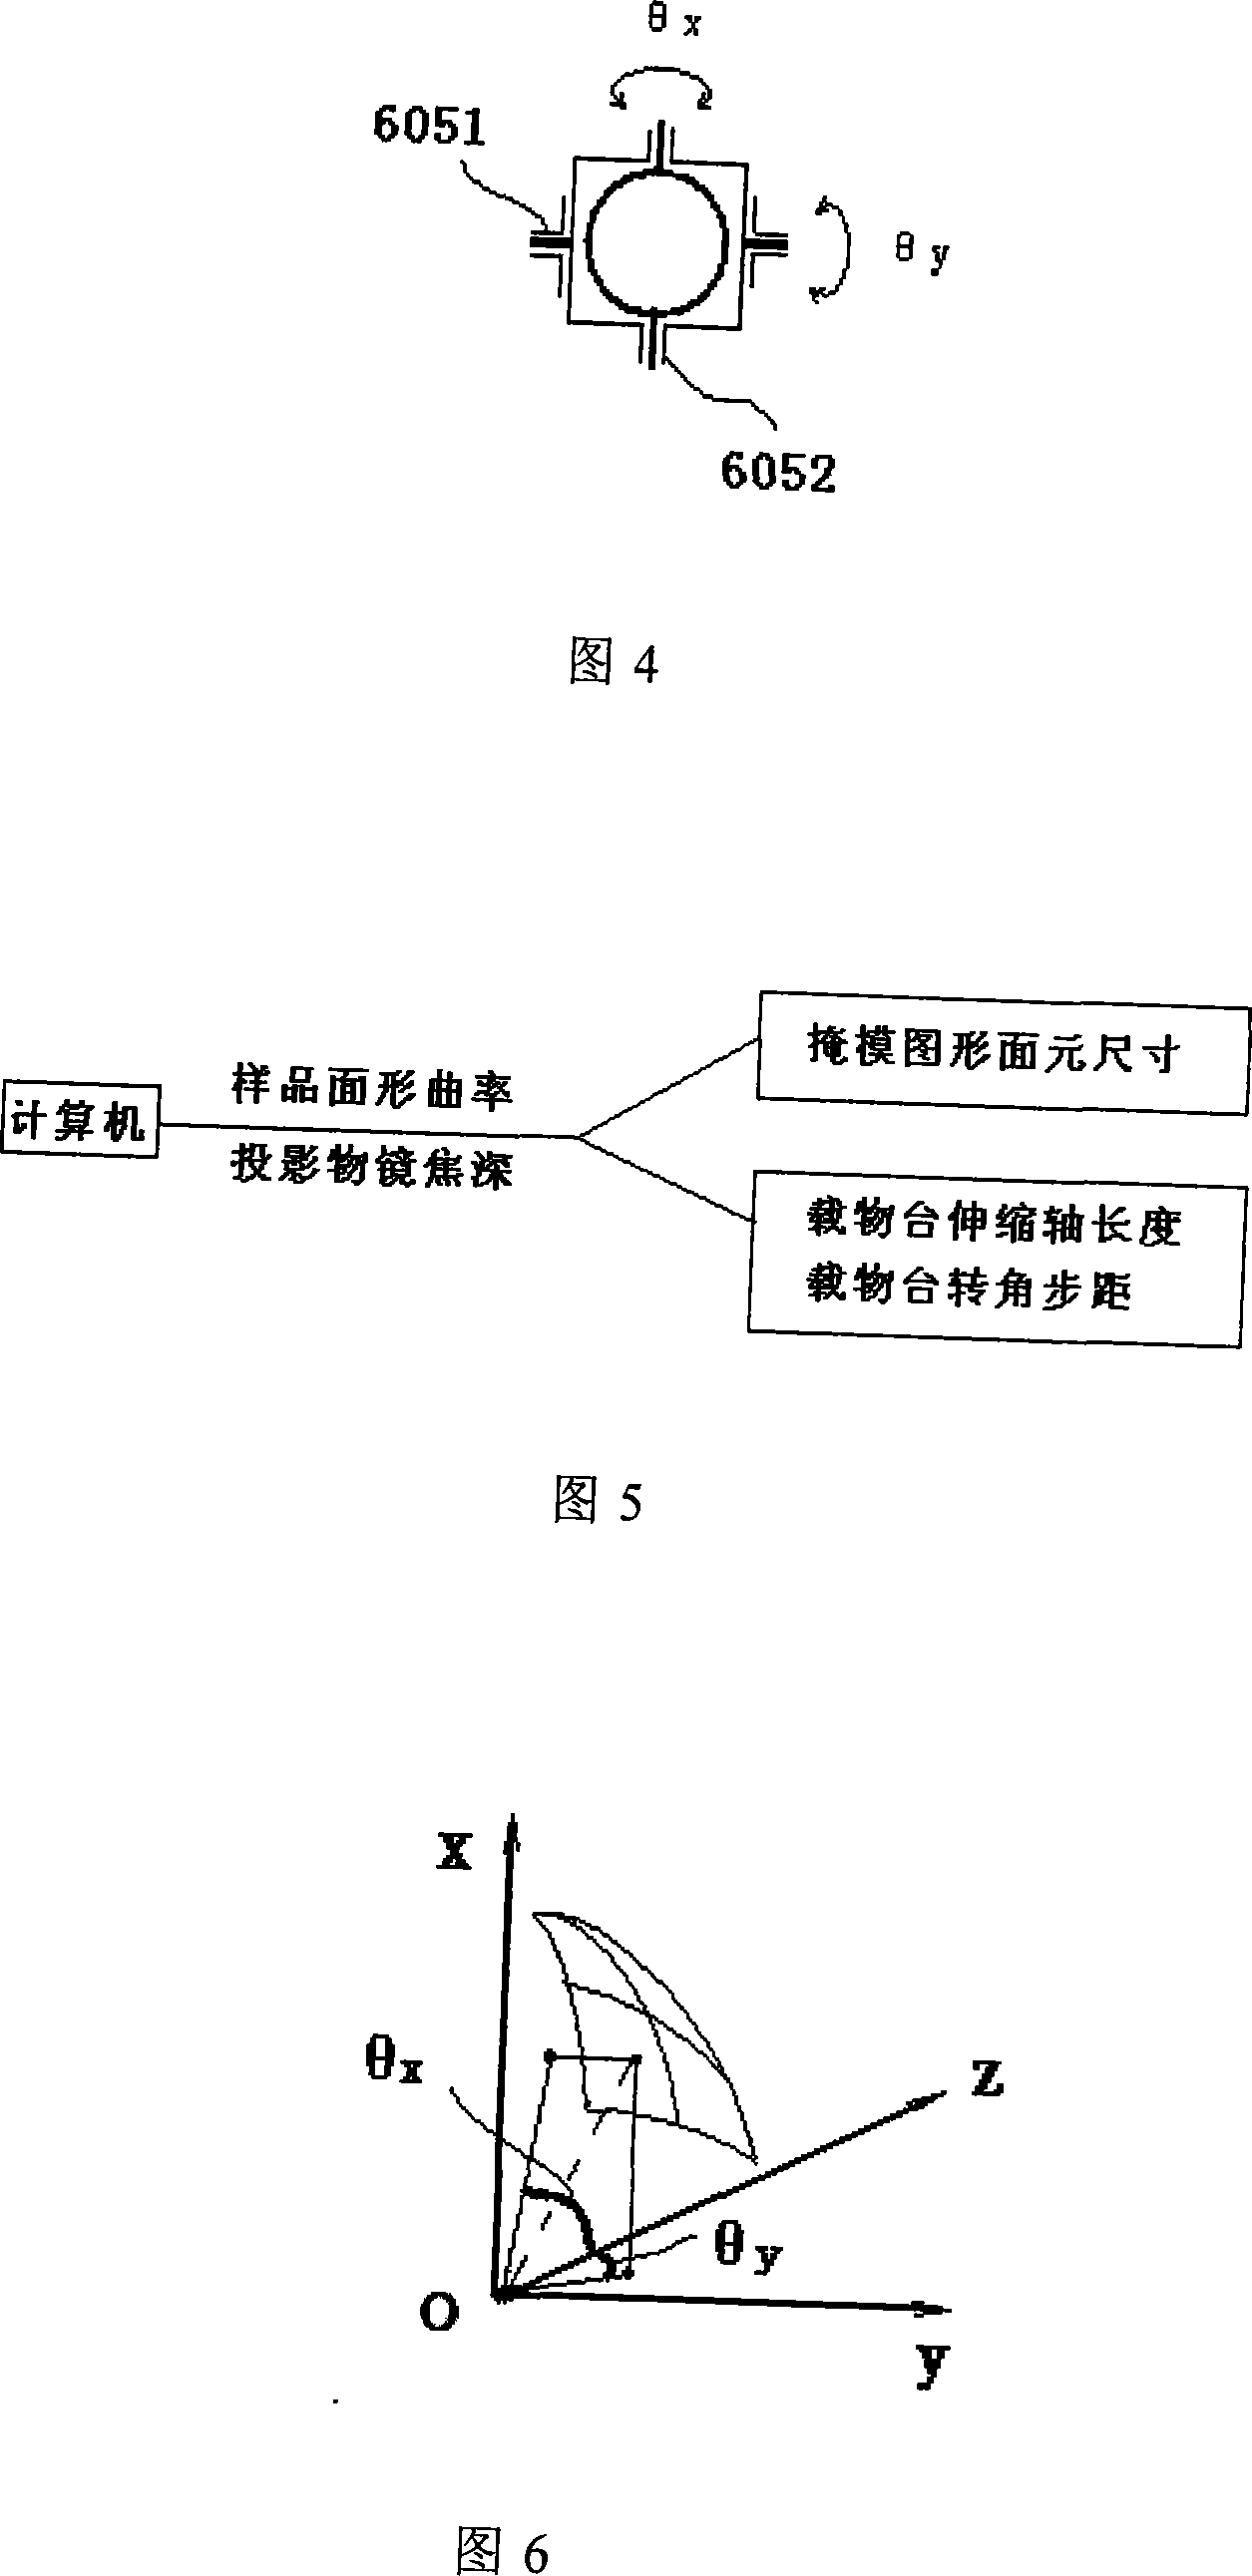 Spherical surface photolithography system with area differentiation